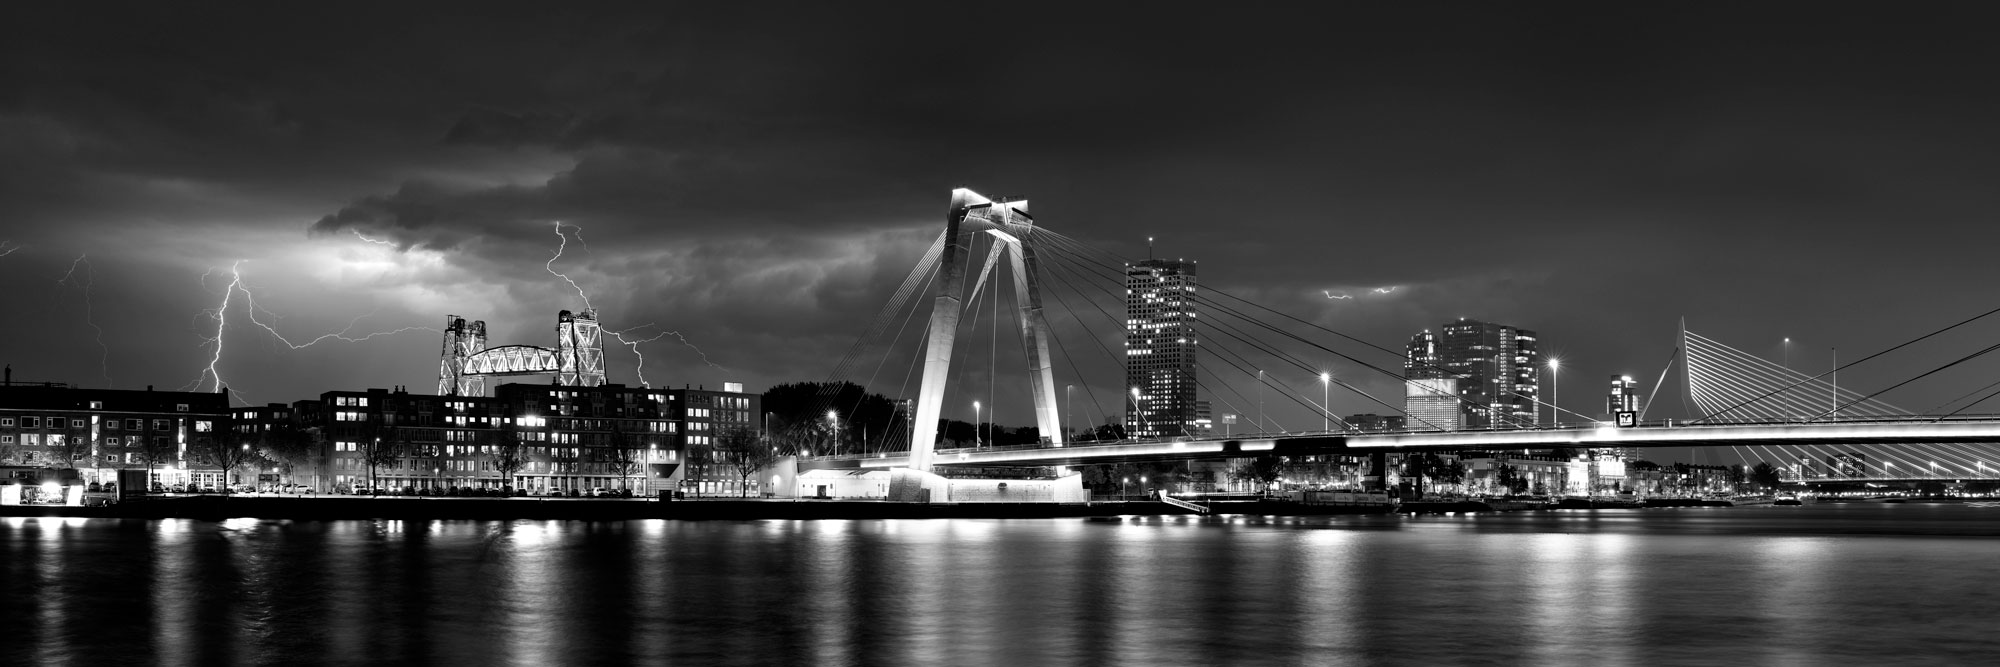 Black and white panorama of a lightning storm over Rotterdam City